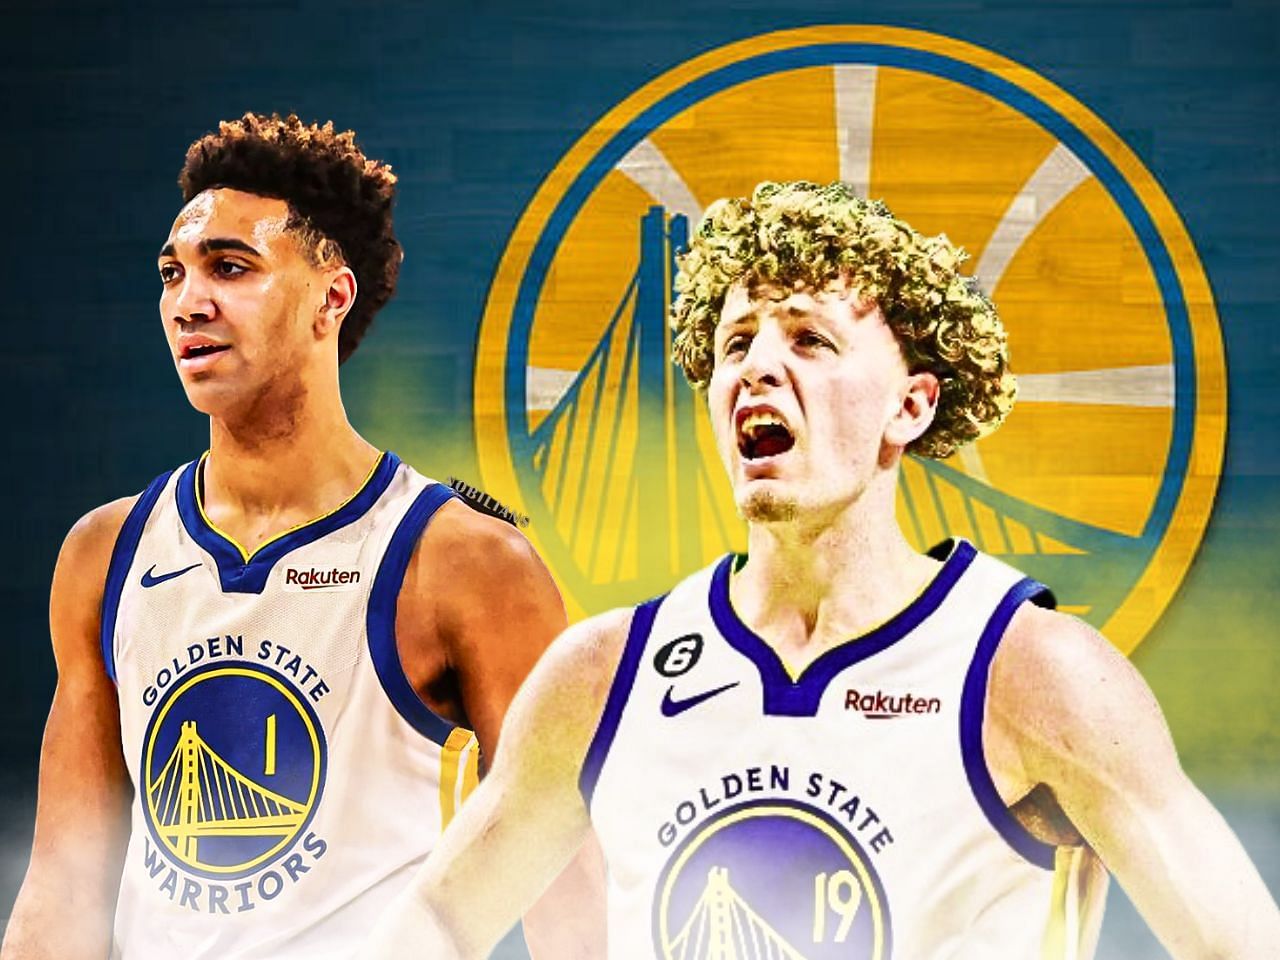 Warriors announce 2023 Summer League roster, headlined by draftees